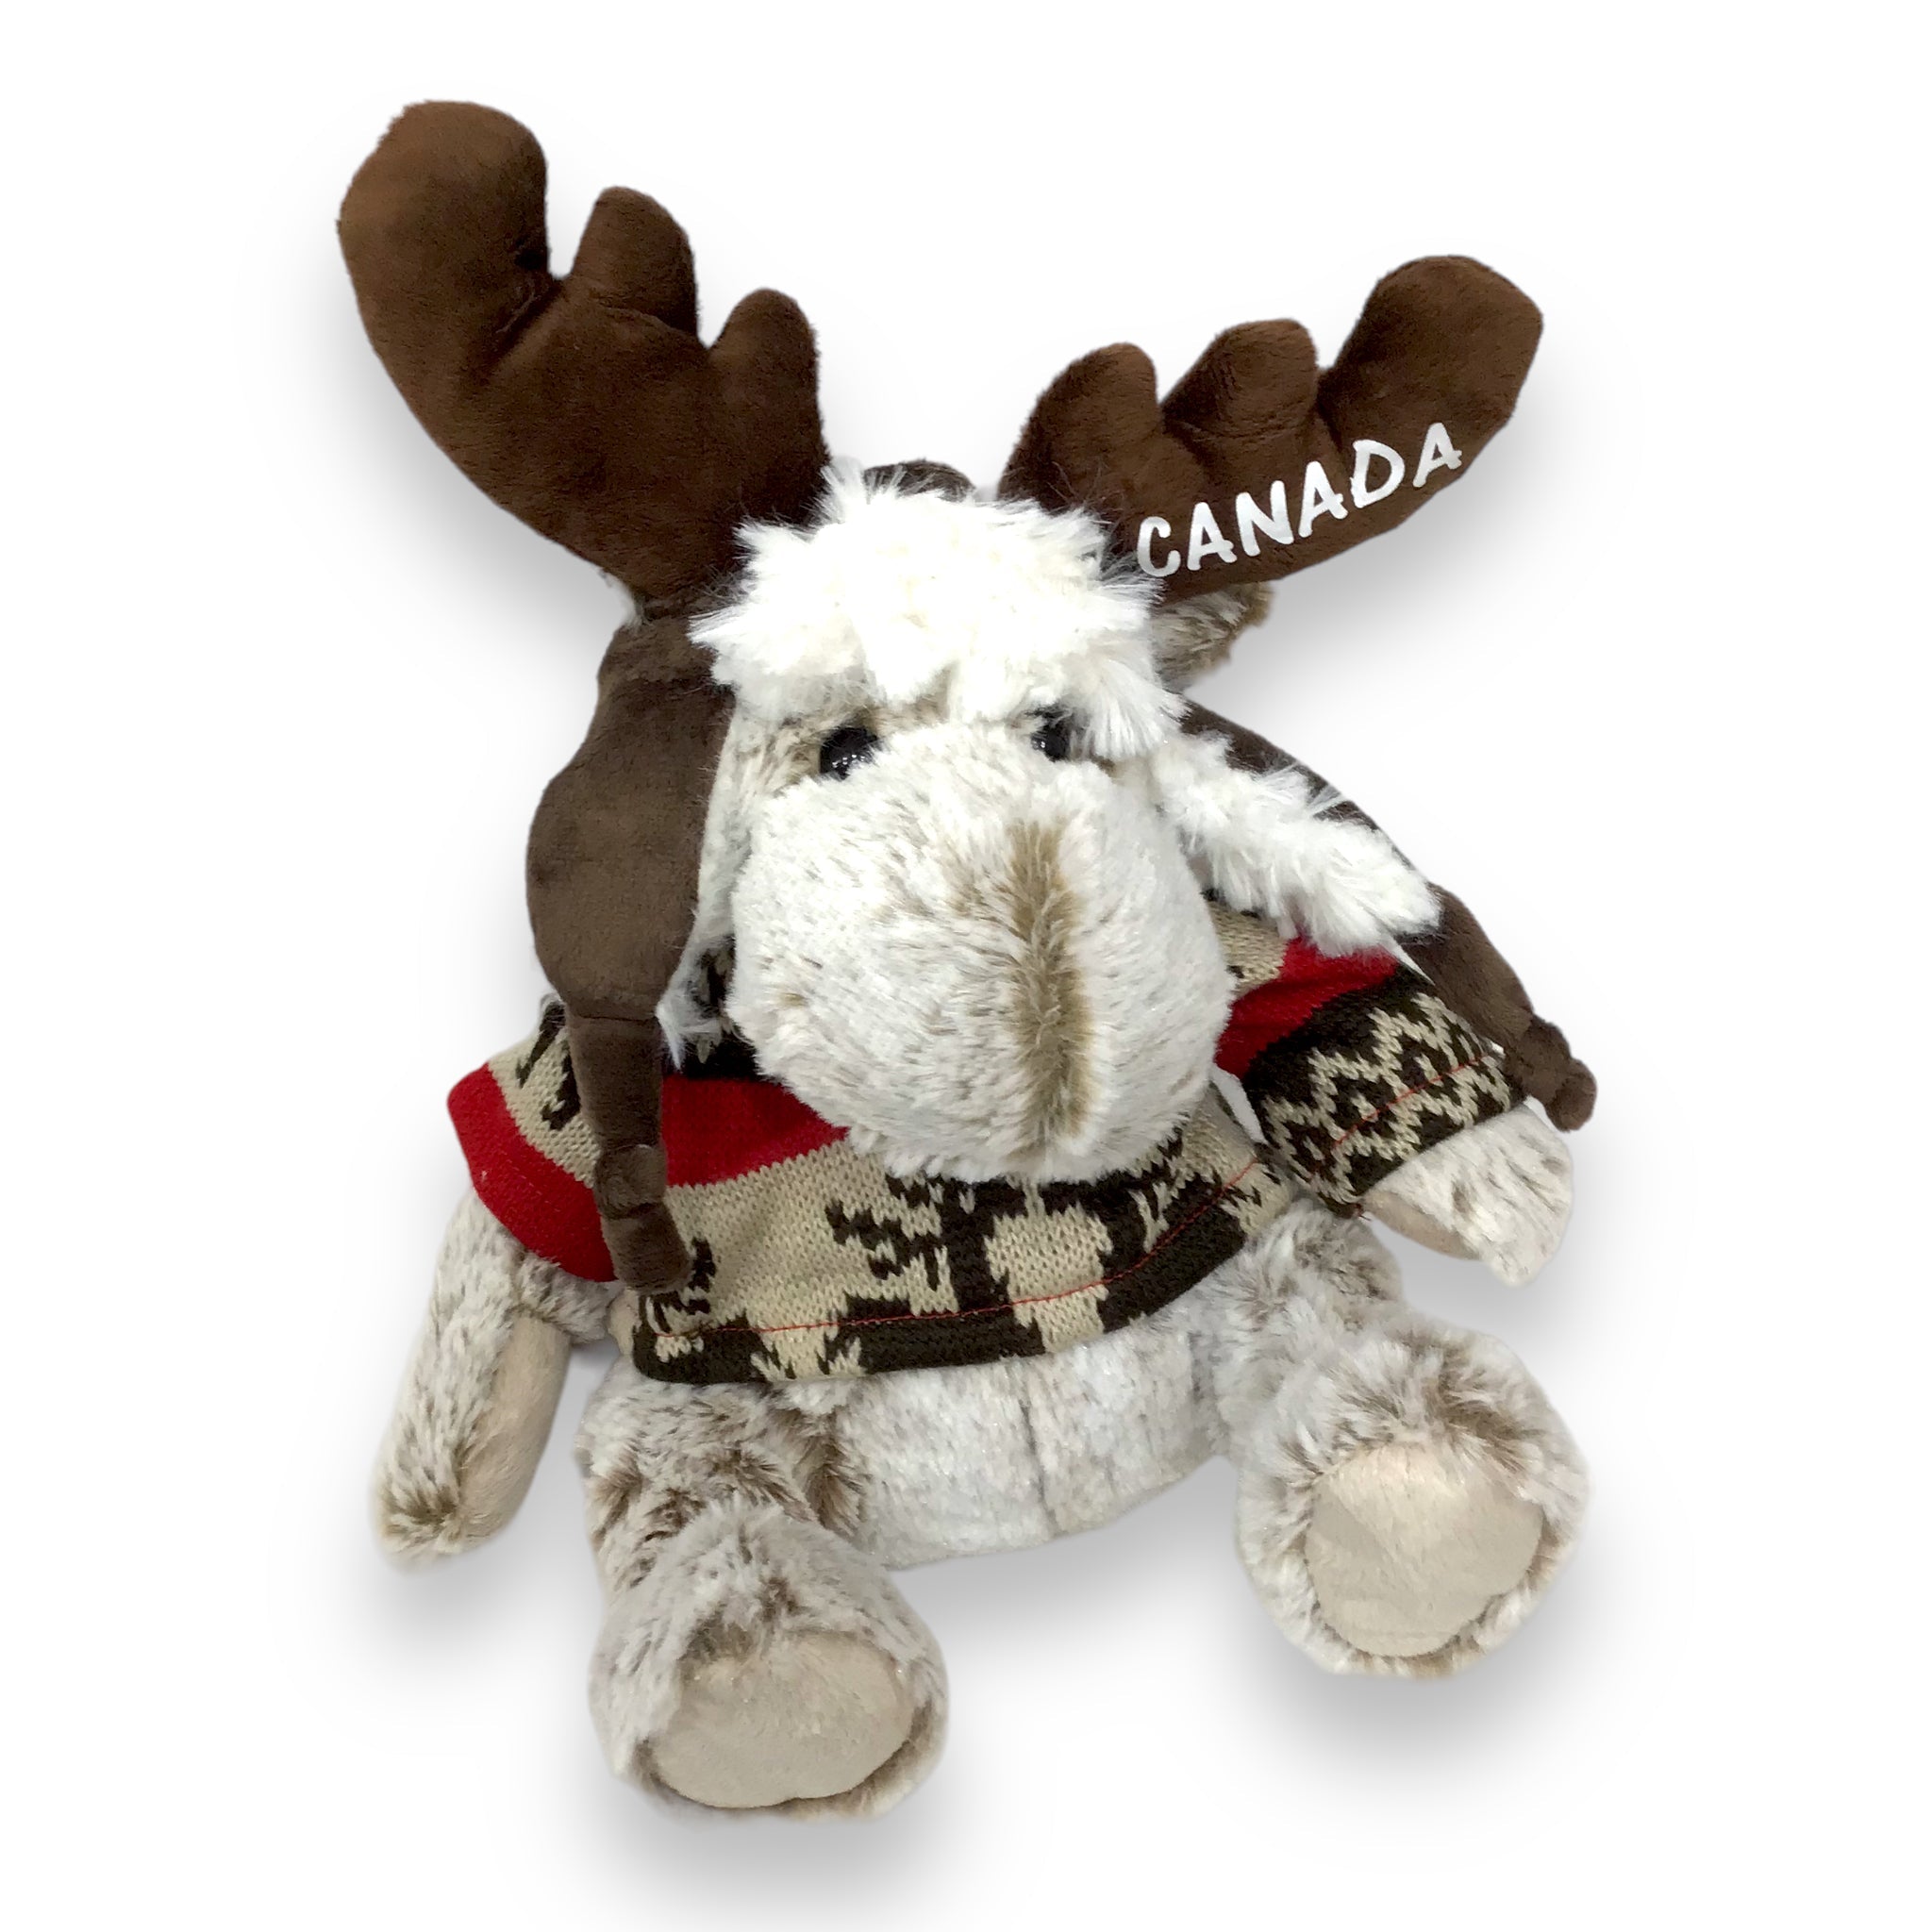 Canada Plush Moose Stuffed Animal - Soft Huggable Moose with Sweater and Hat, Adorable Playtime Plush Toy, Wild Life Cuddle Souvenir Gifts for Kids and Adults - 10 Inches